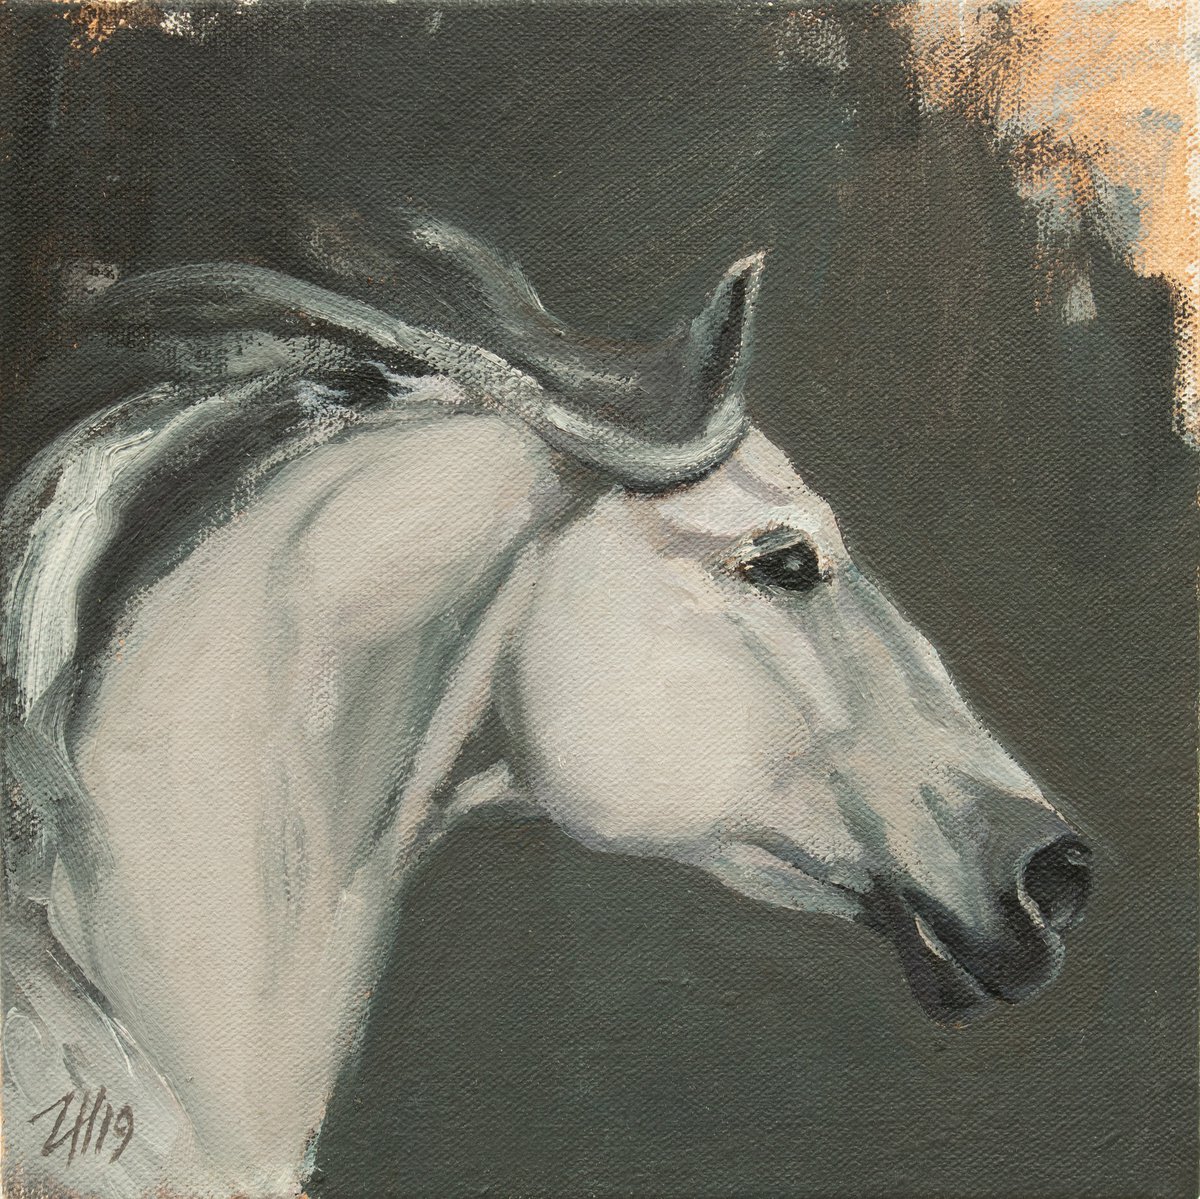 Family Equidae (study 13) by Zil Hoque